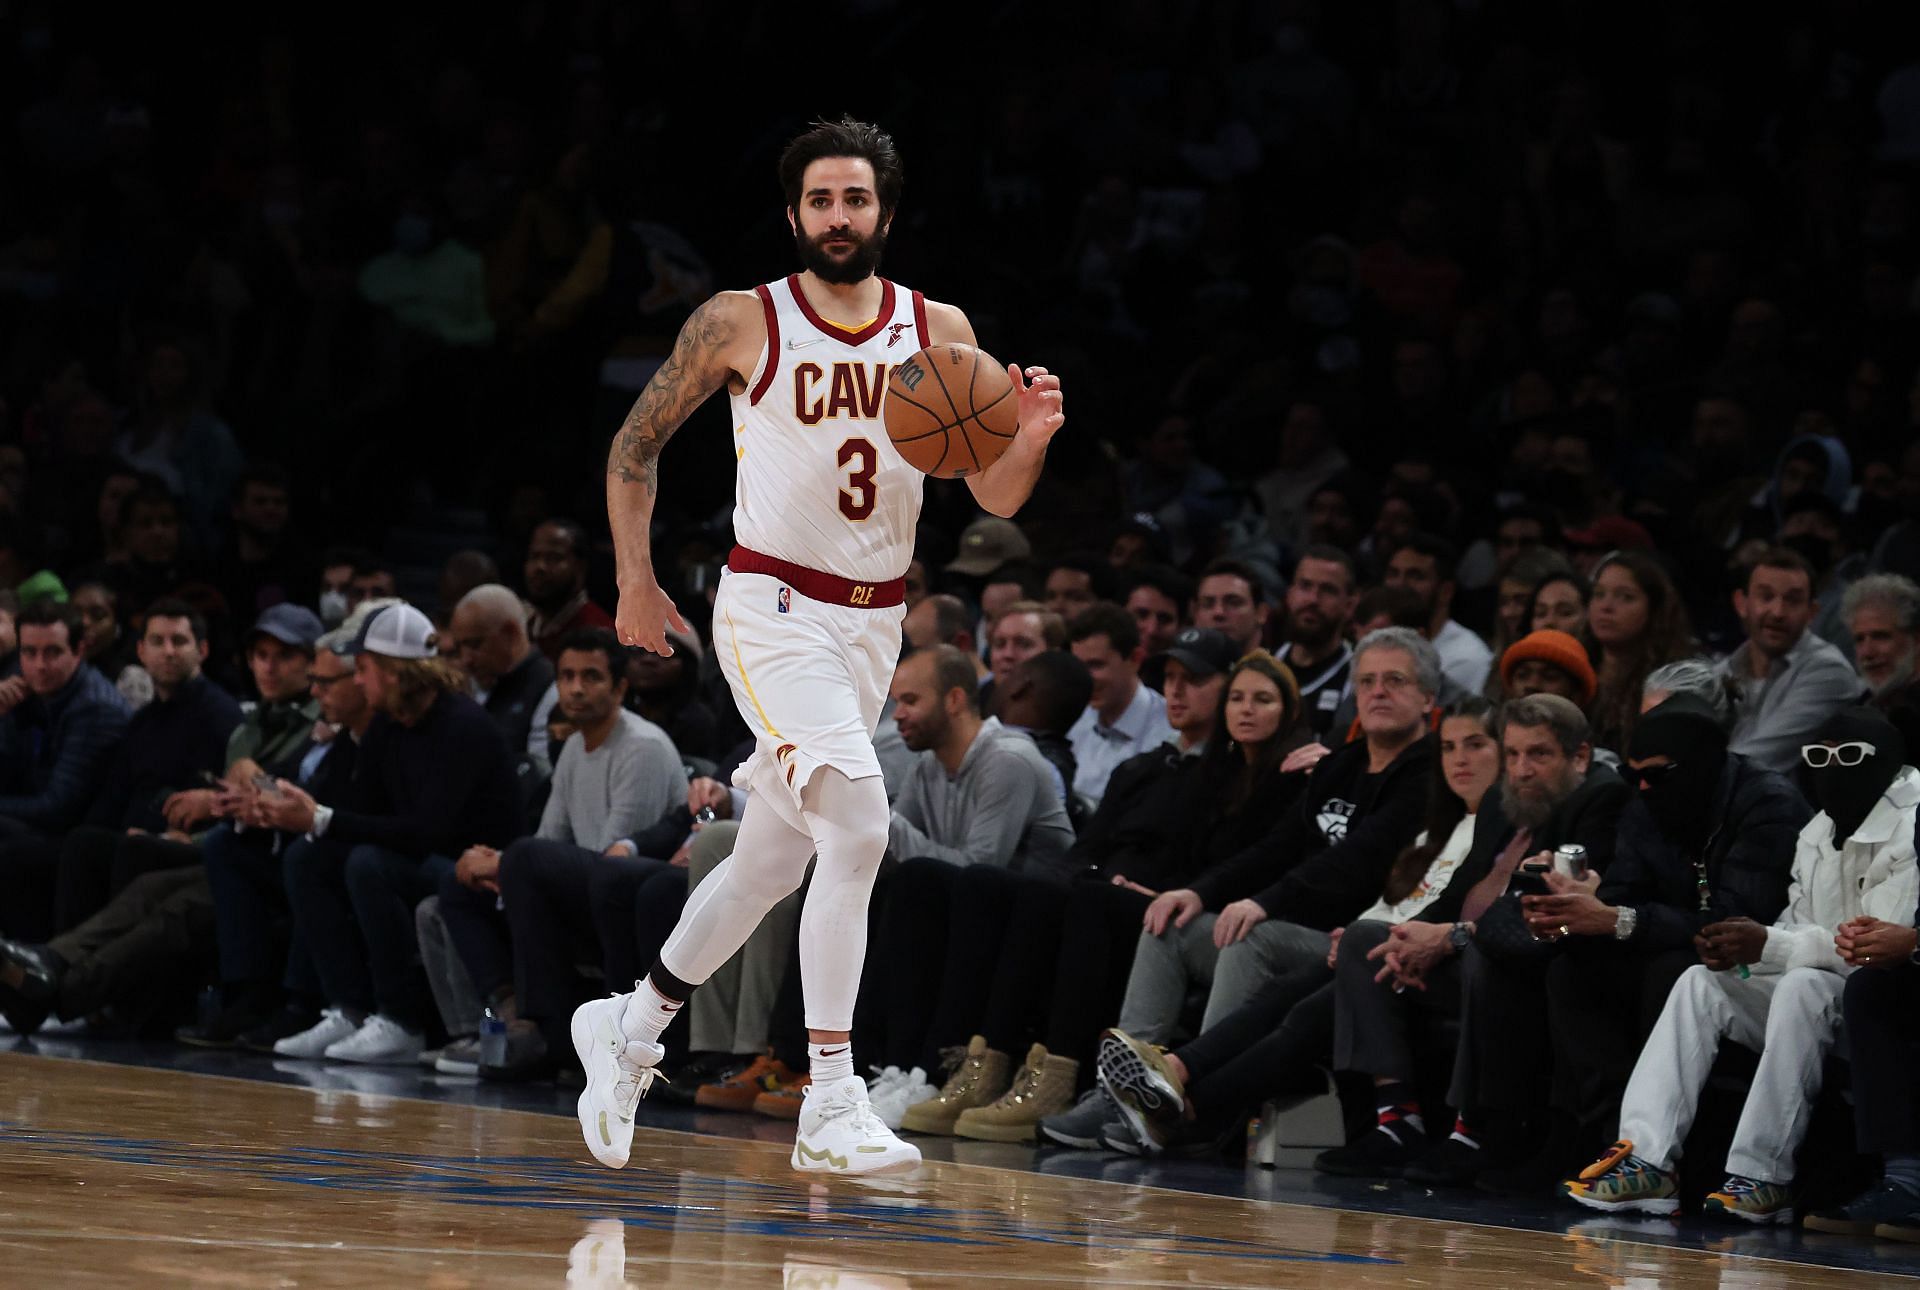 Ricky Rubio of the Cleveland Cavaliers.